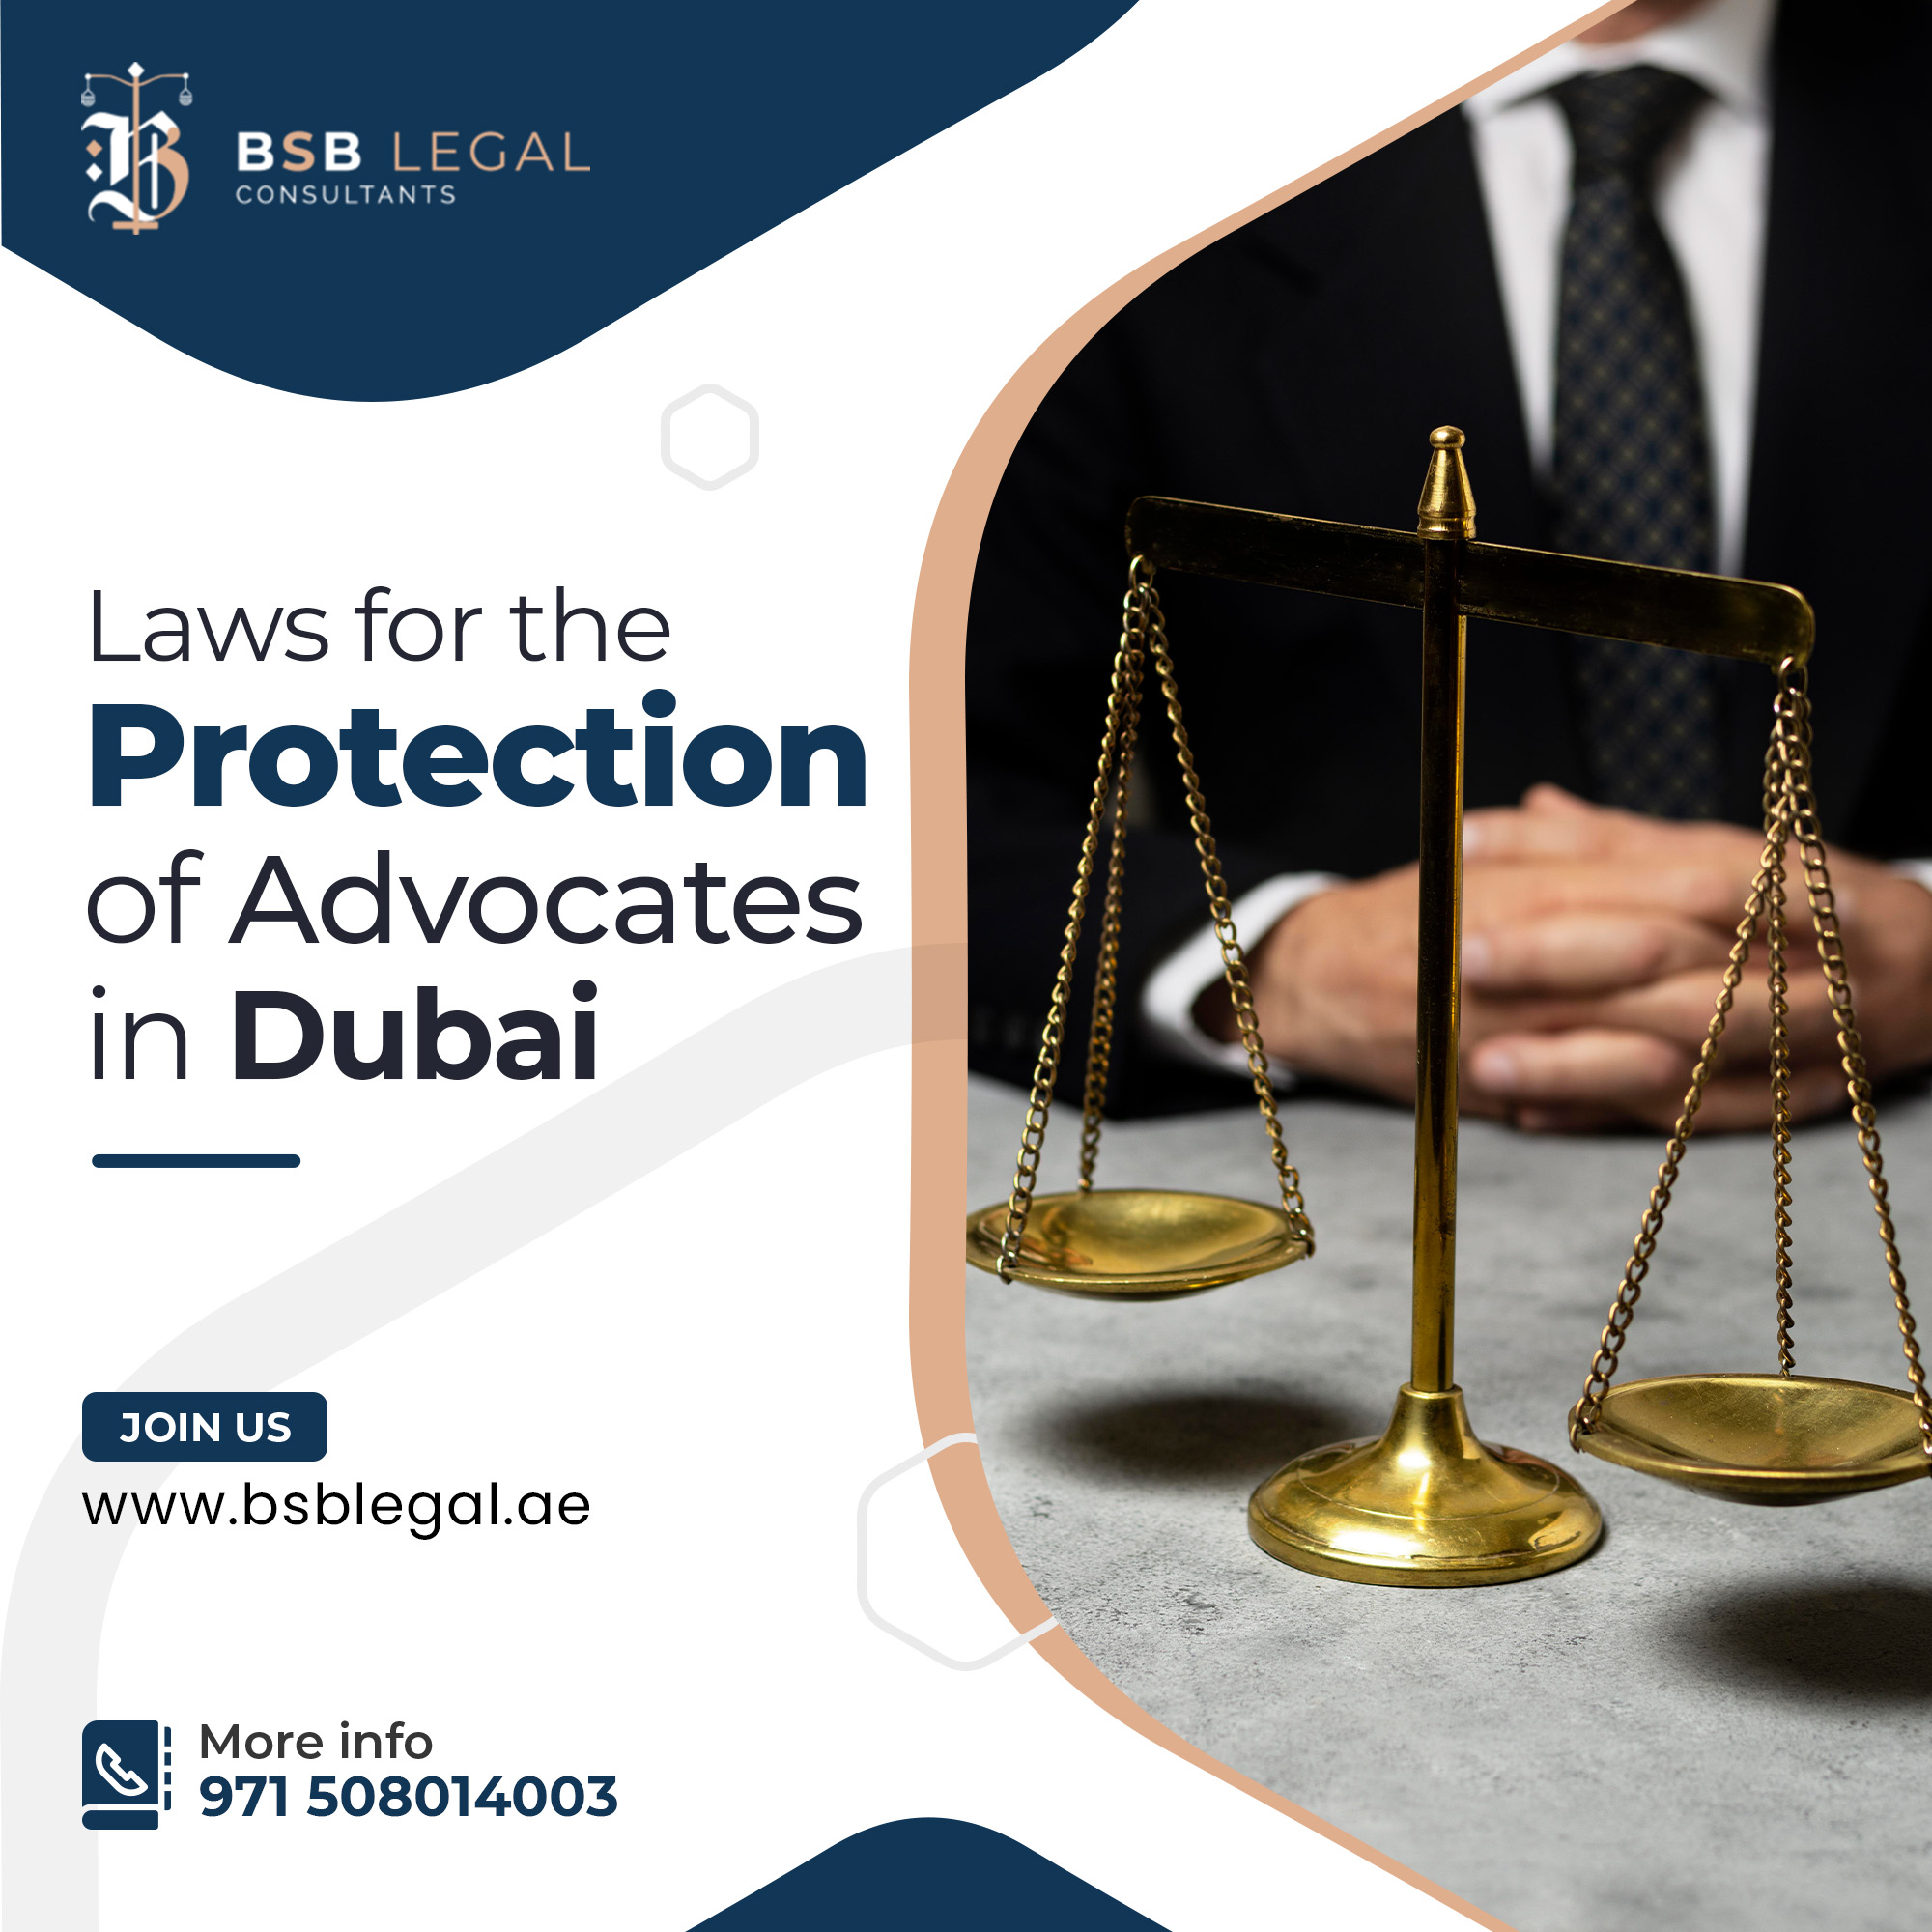 Laws for the Protection of Advocates in Dubai